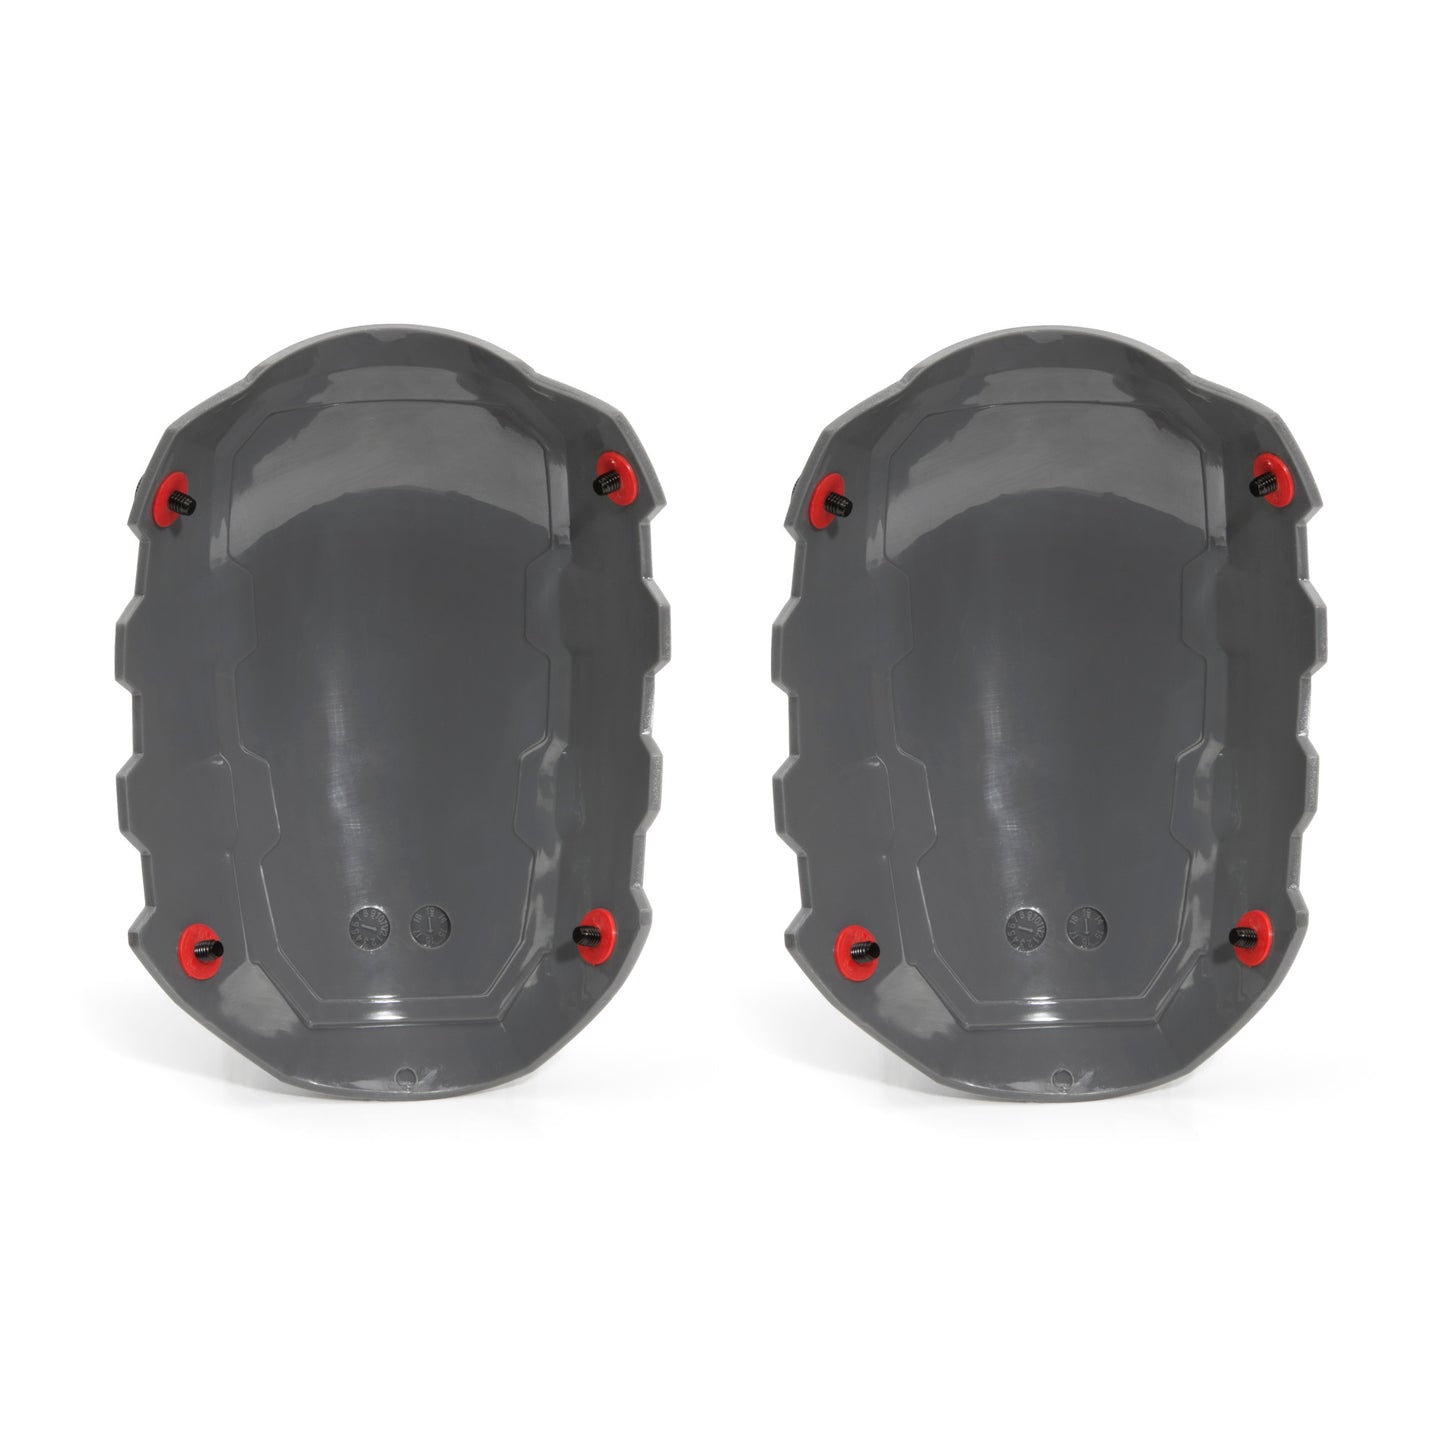 Non-Marring Cap Attachment for PROLOCK Knee Pads (1 pair, caps only)